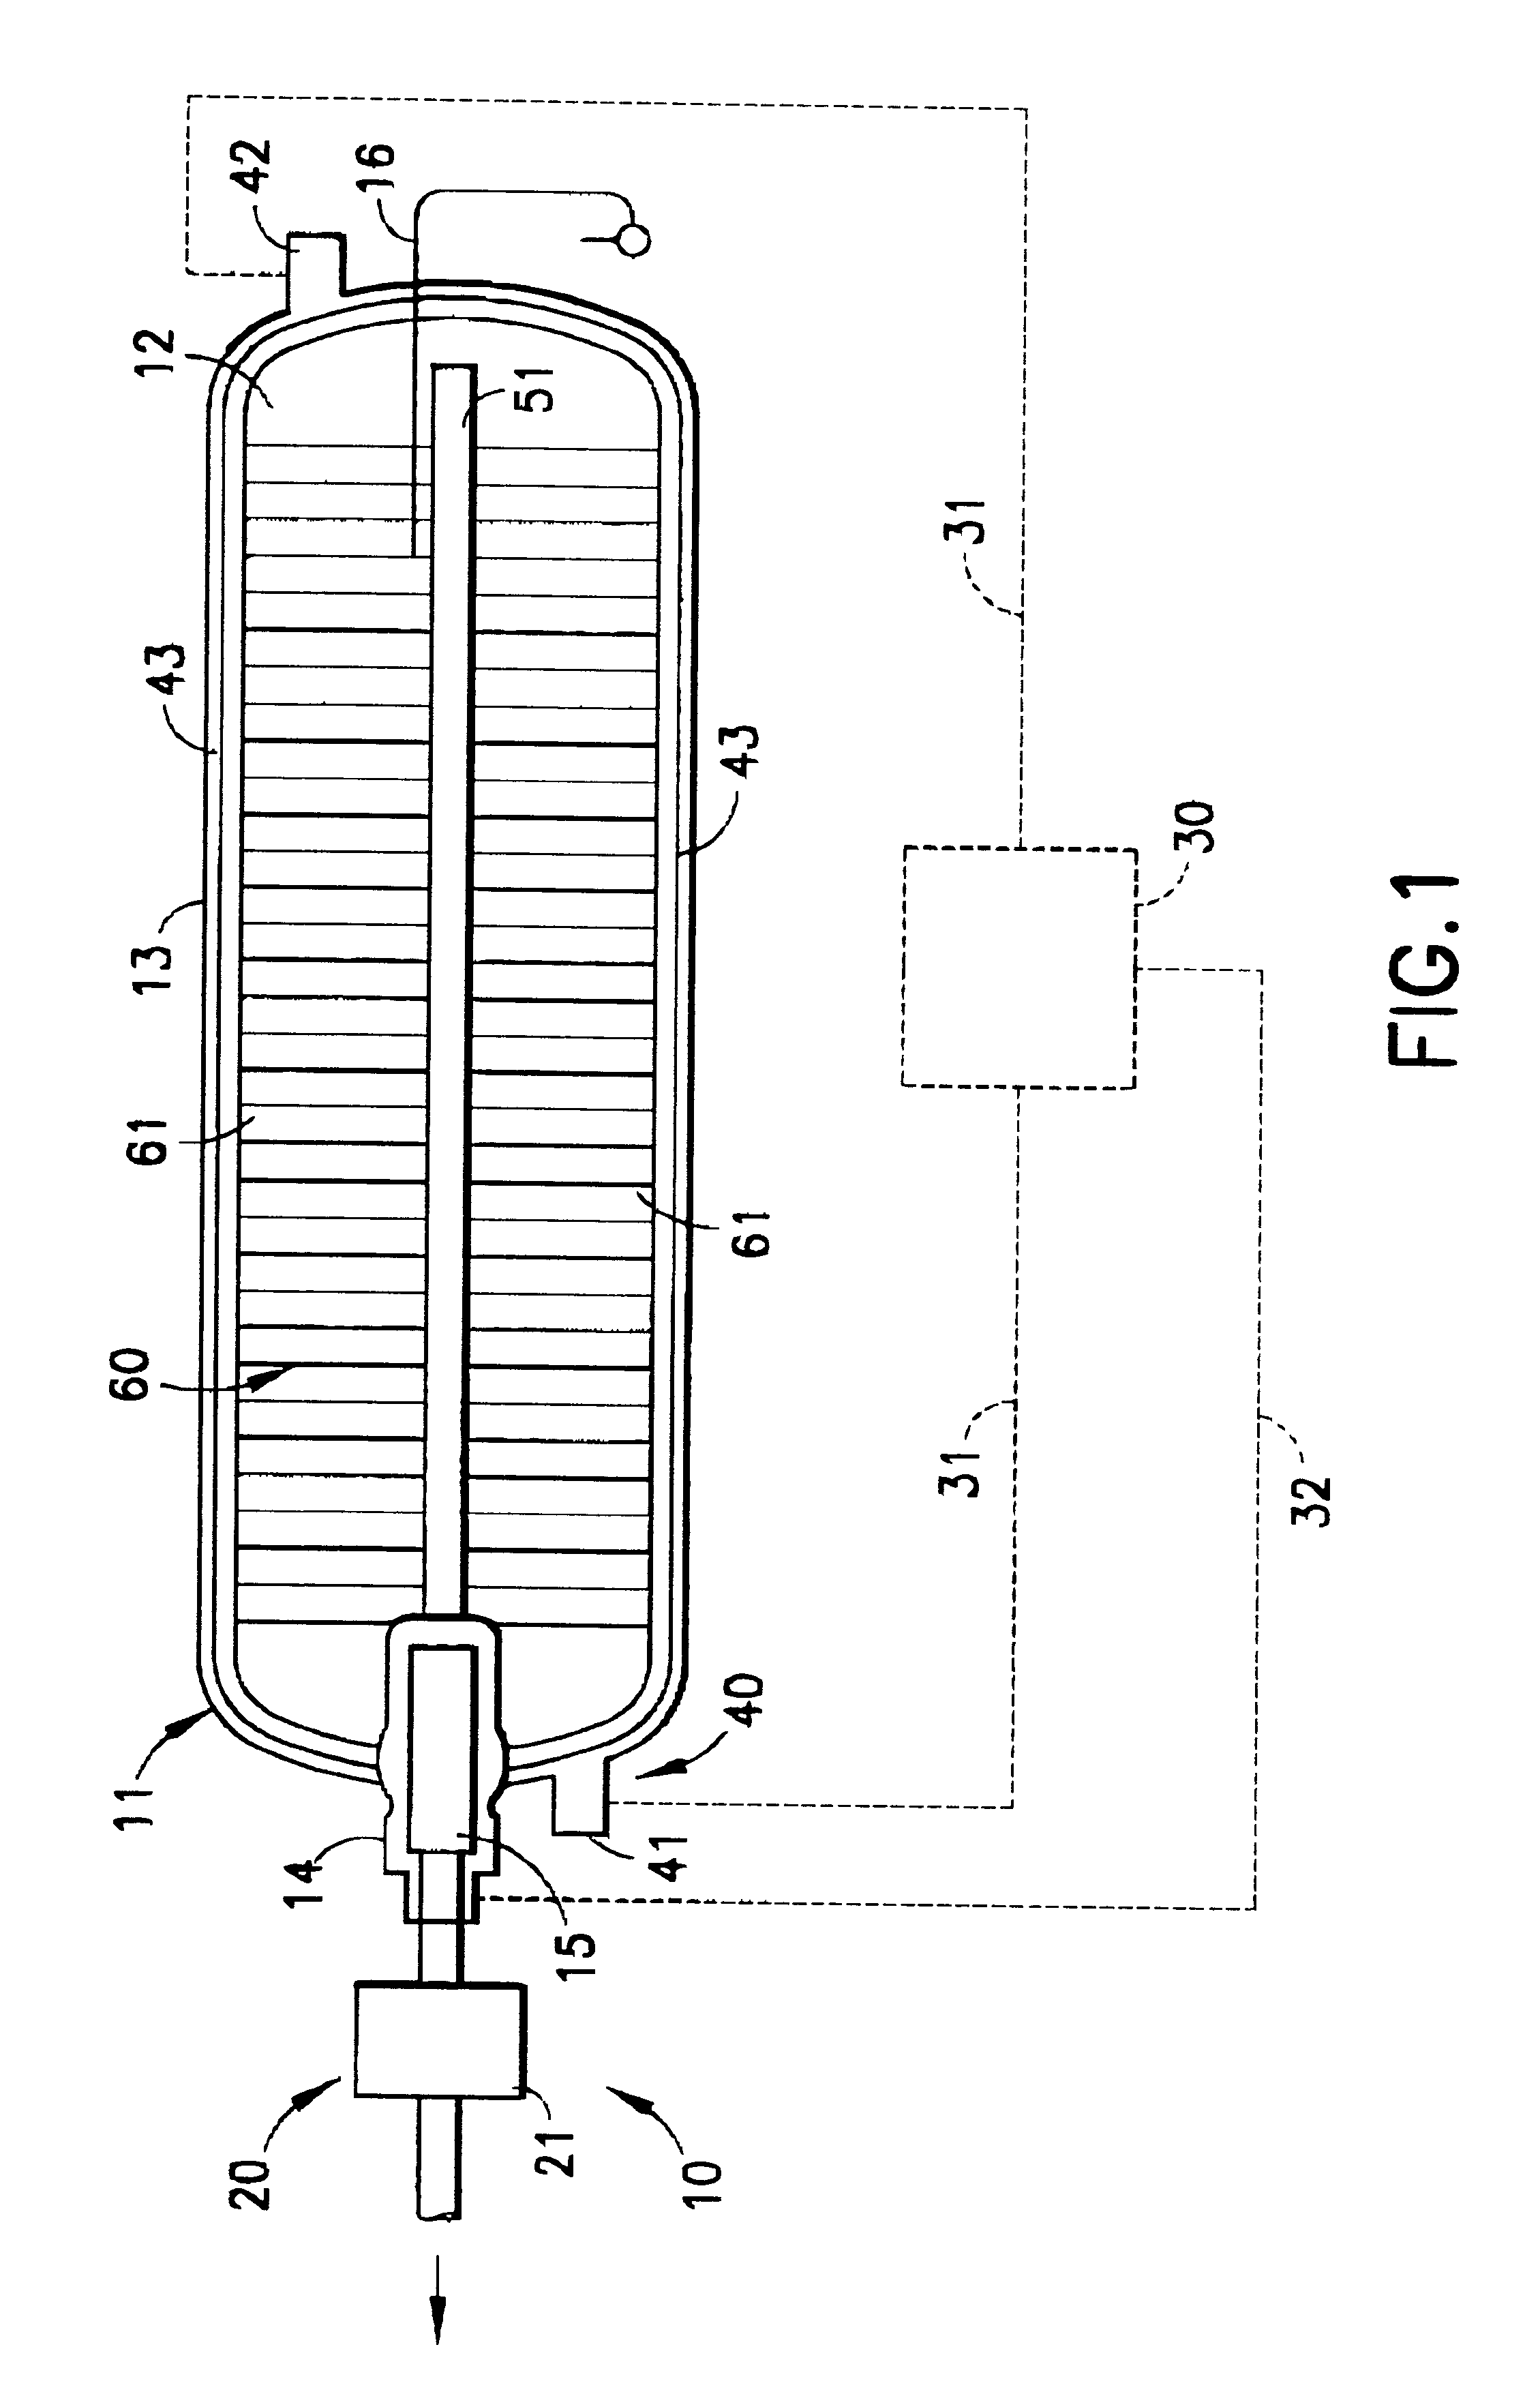 Device for storing compressed gas